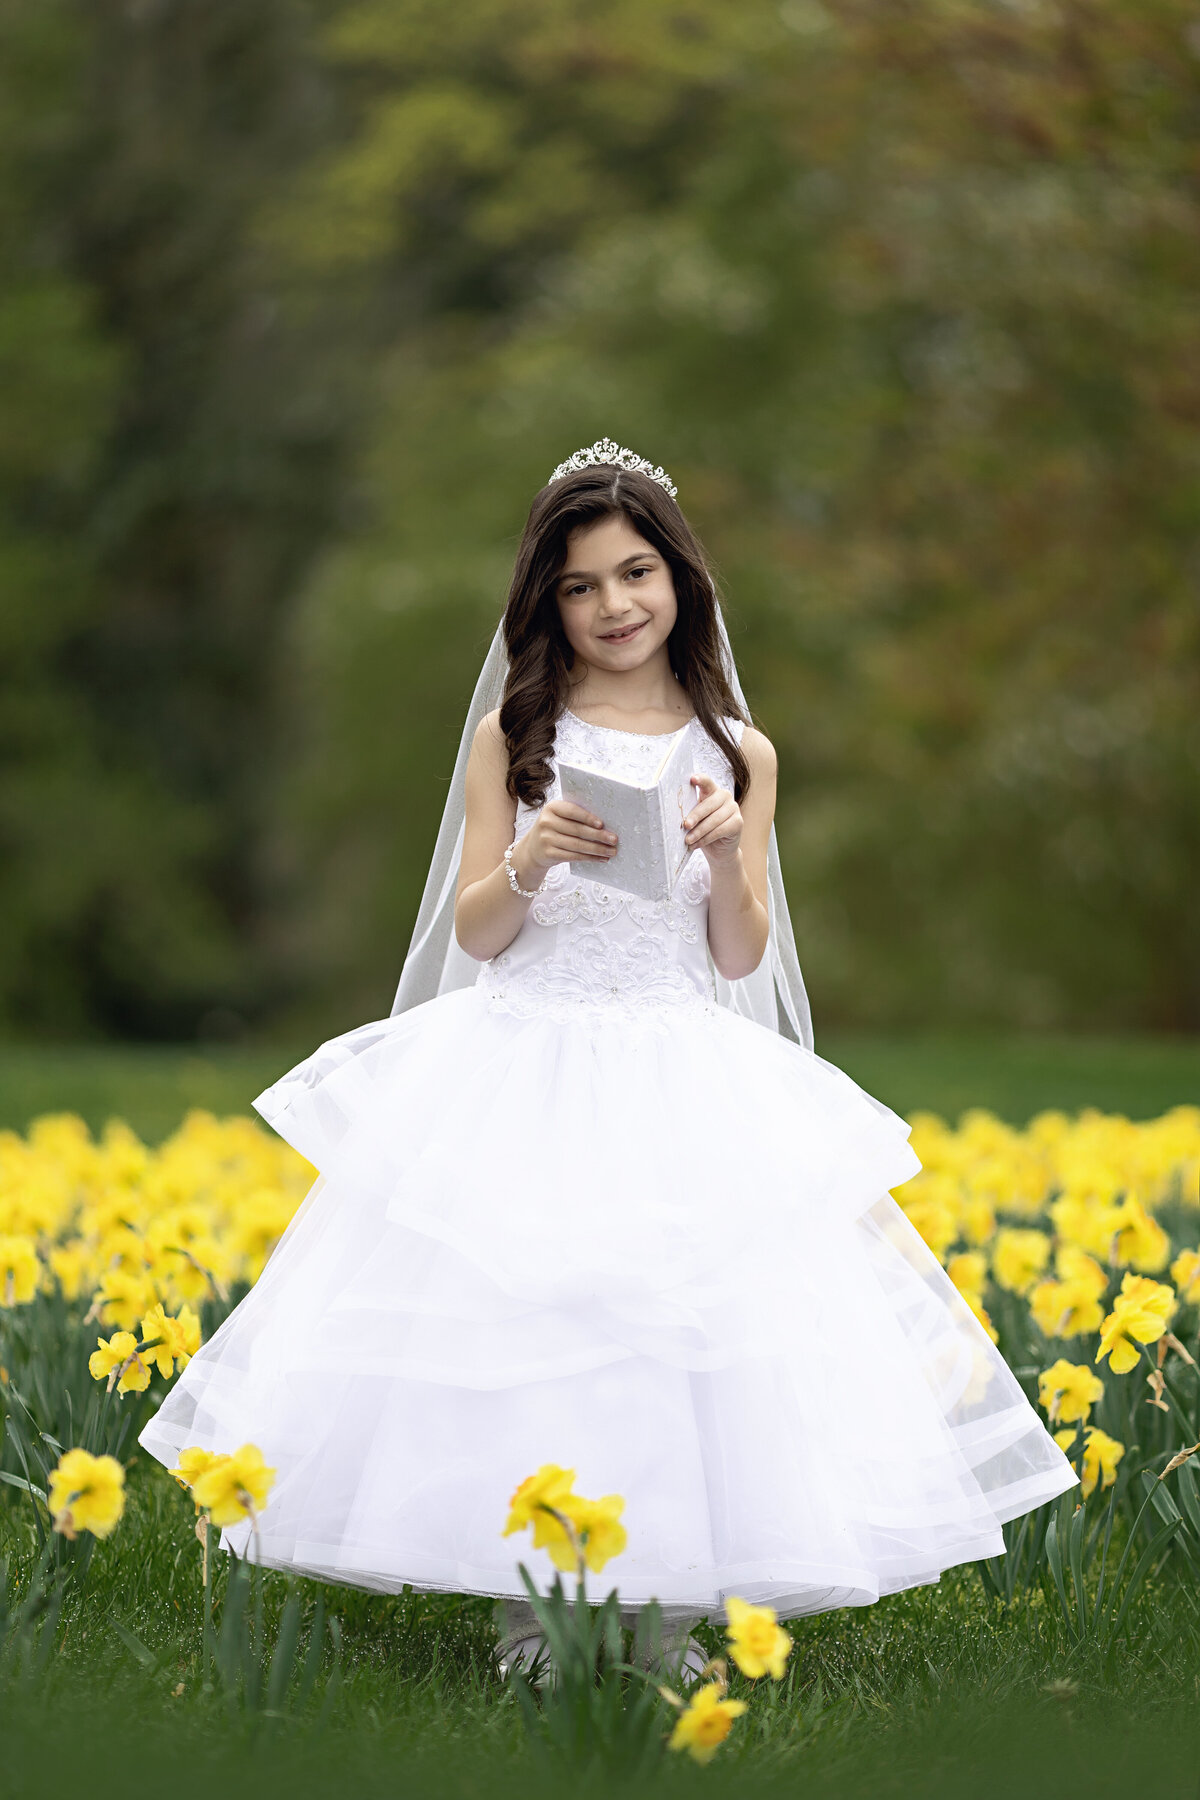 A girl with dark hair reads a book while standing among yellow daffodils in a long white dress